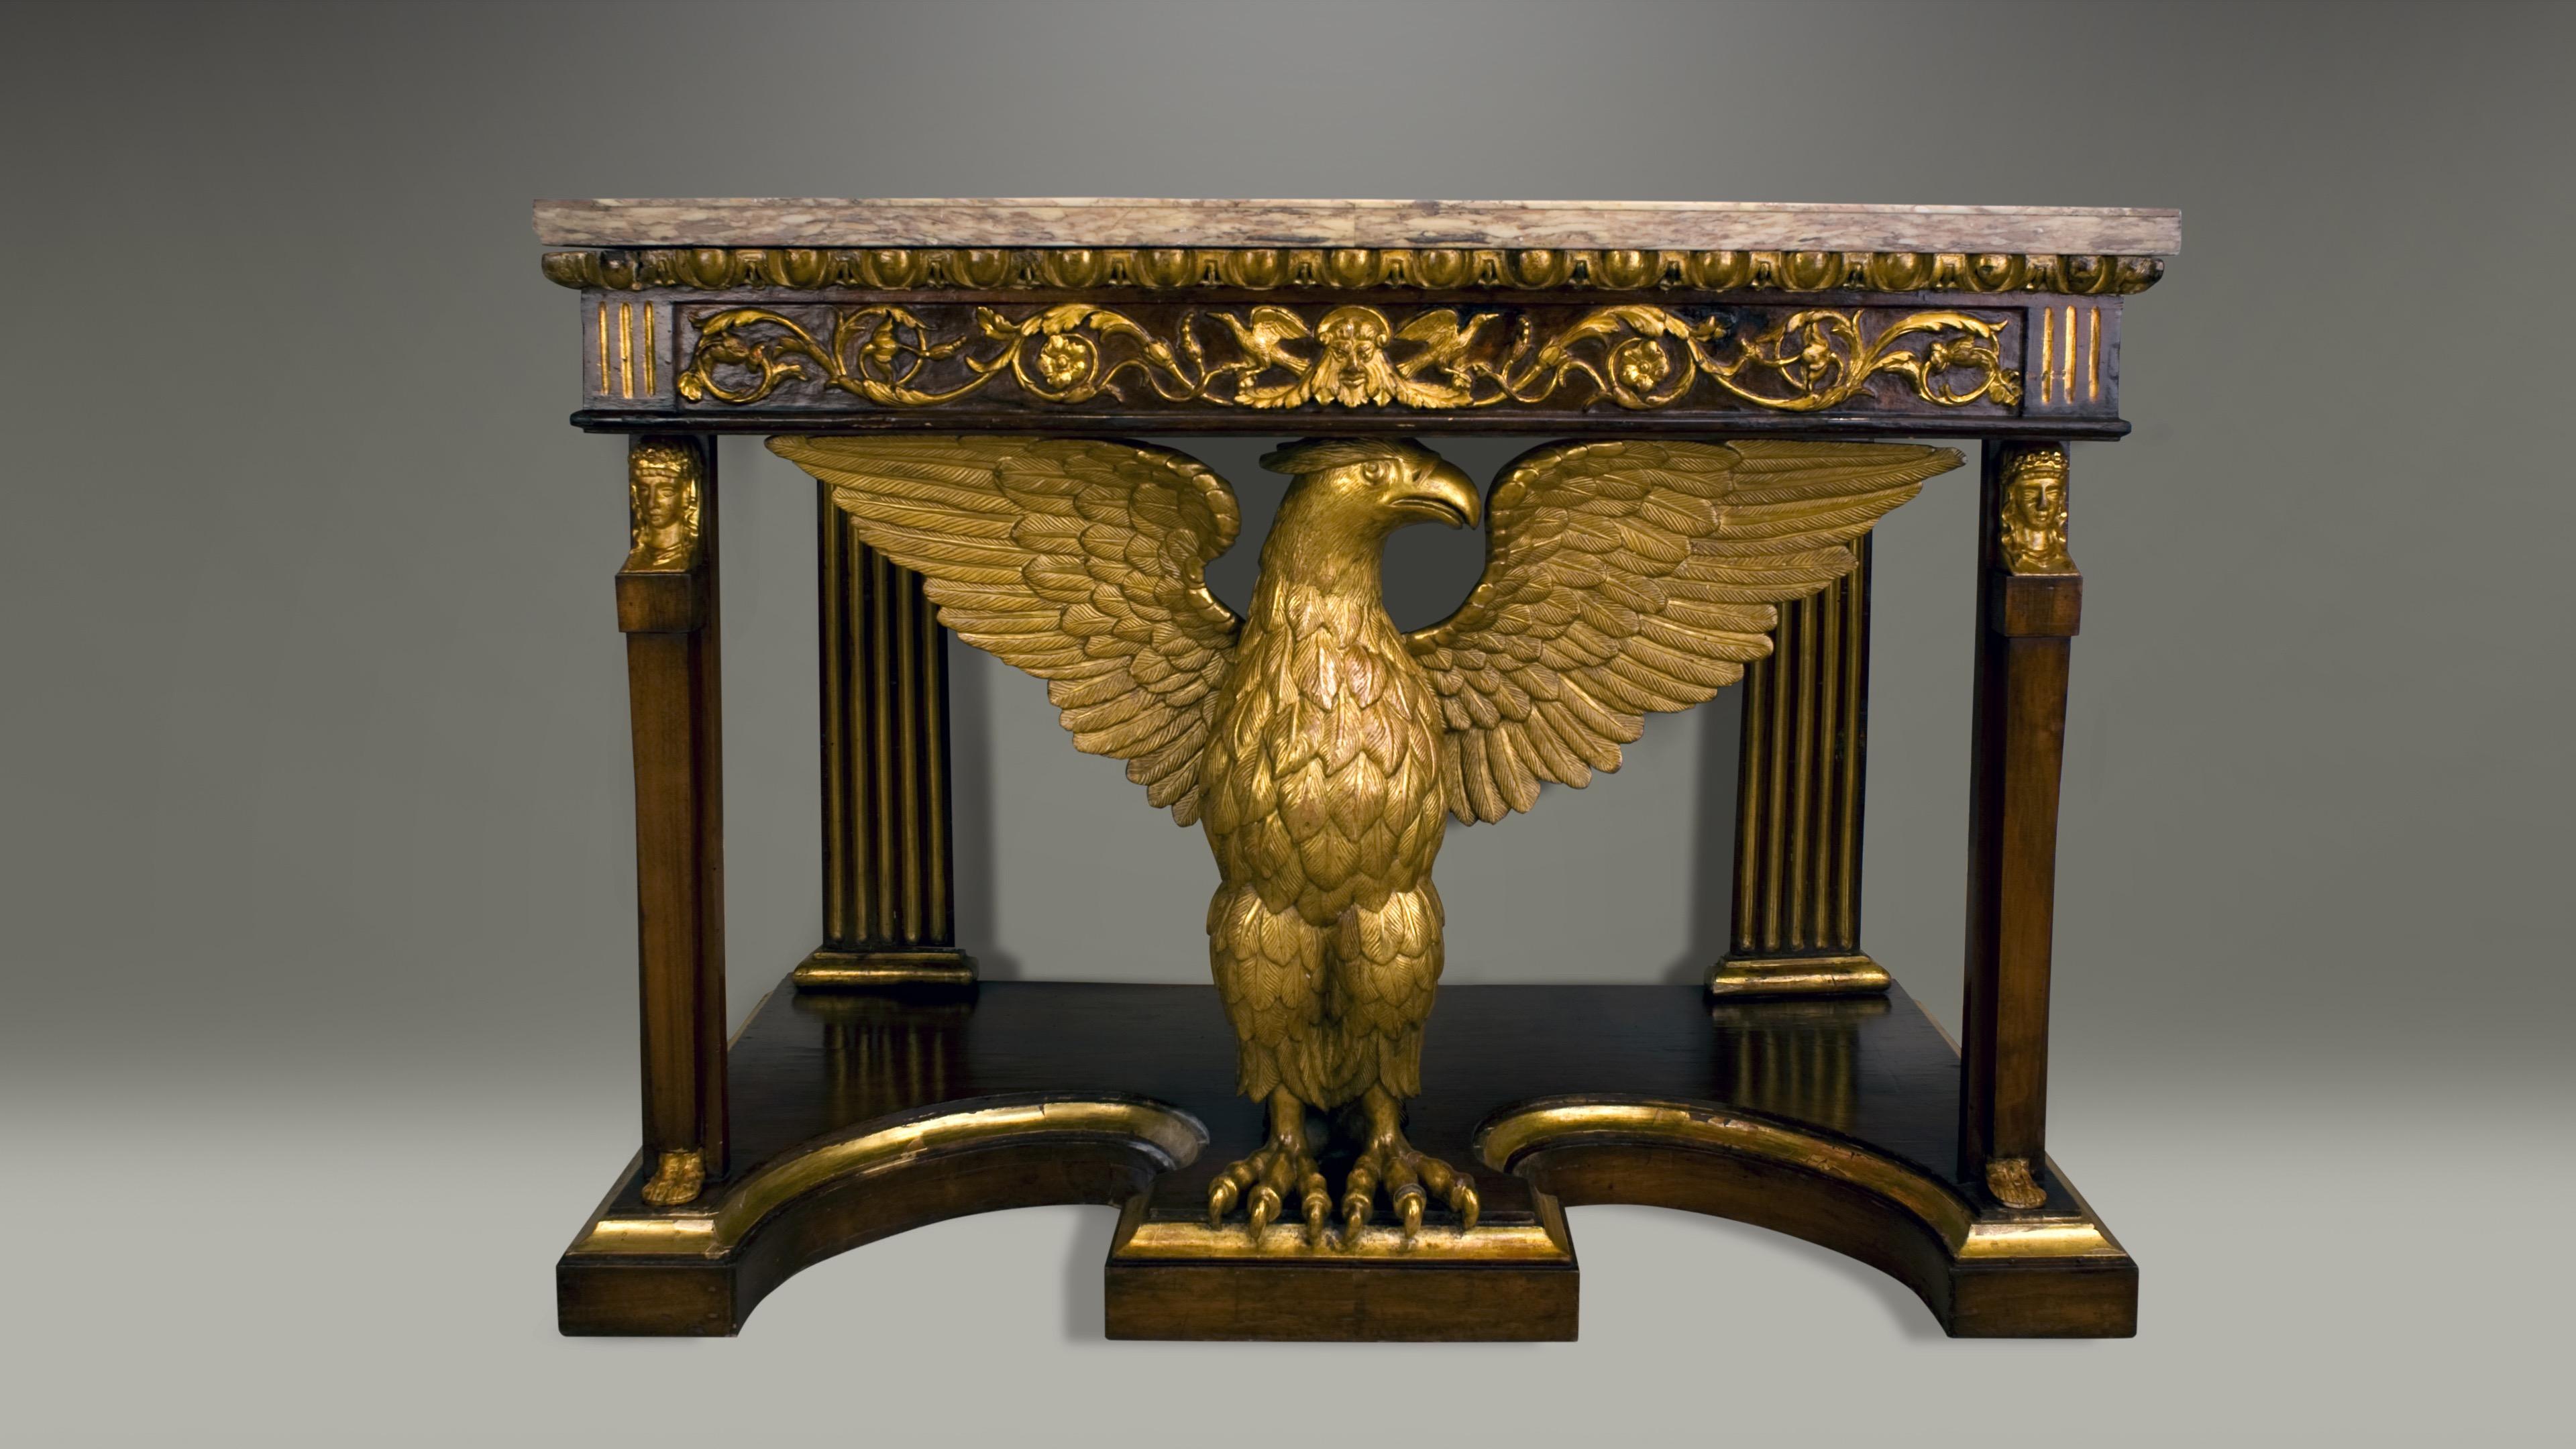 A rectangular Onyx (Onda Marino) top sits above an ornately carved frieze, circa 1820. Fluted rear columns and tapered front columns with carved and gilt heads and feet provide support. Ultimately depicted is a centered elaborately carved giltwood